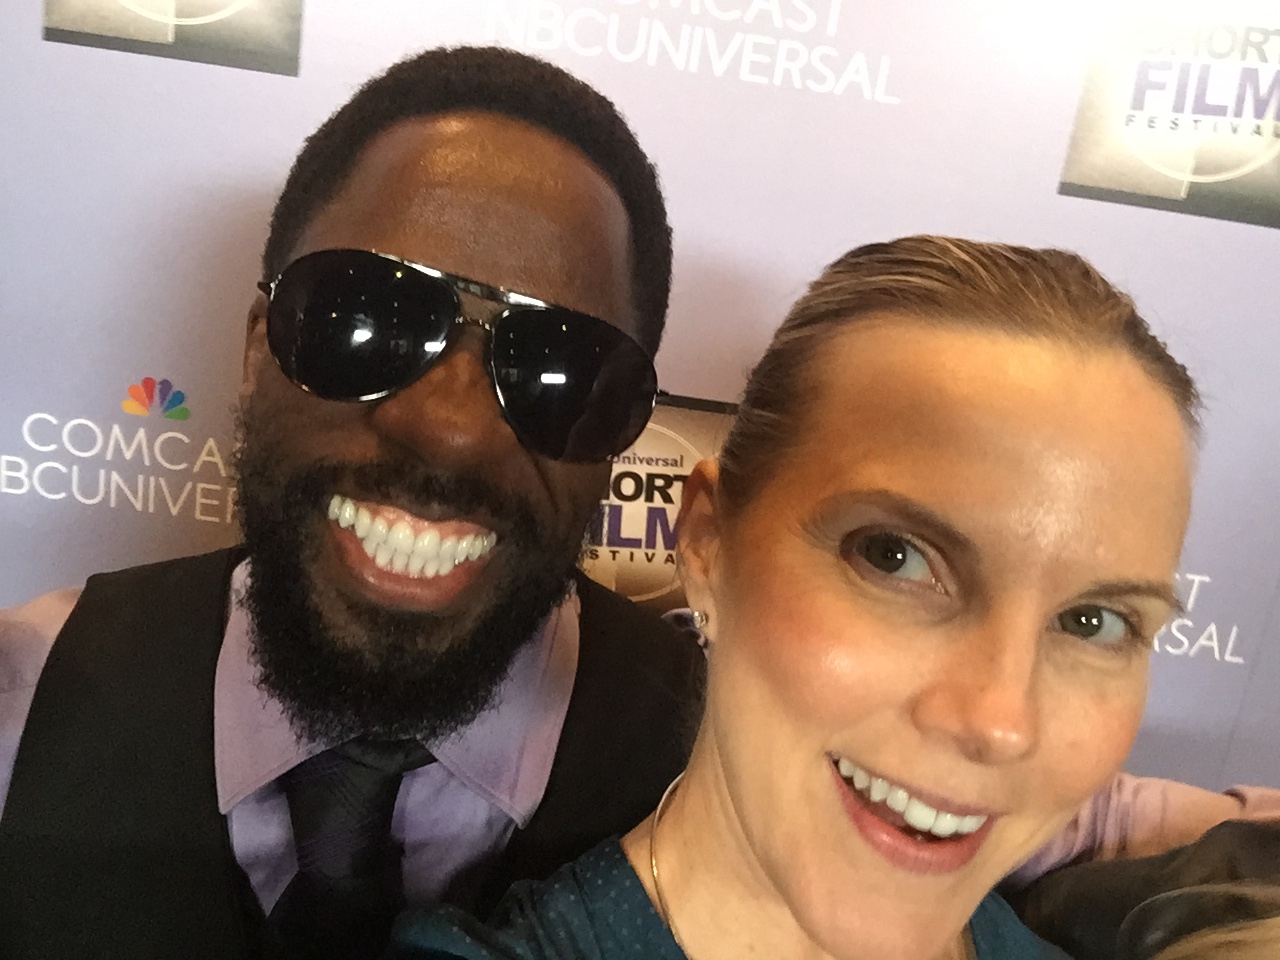 NBCUniversal Shorts - Comedian/Host Wil Sylvince and Joy Mahaffey